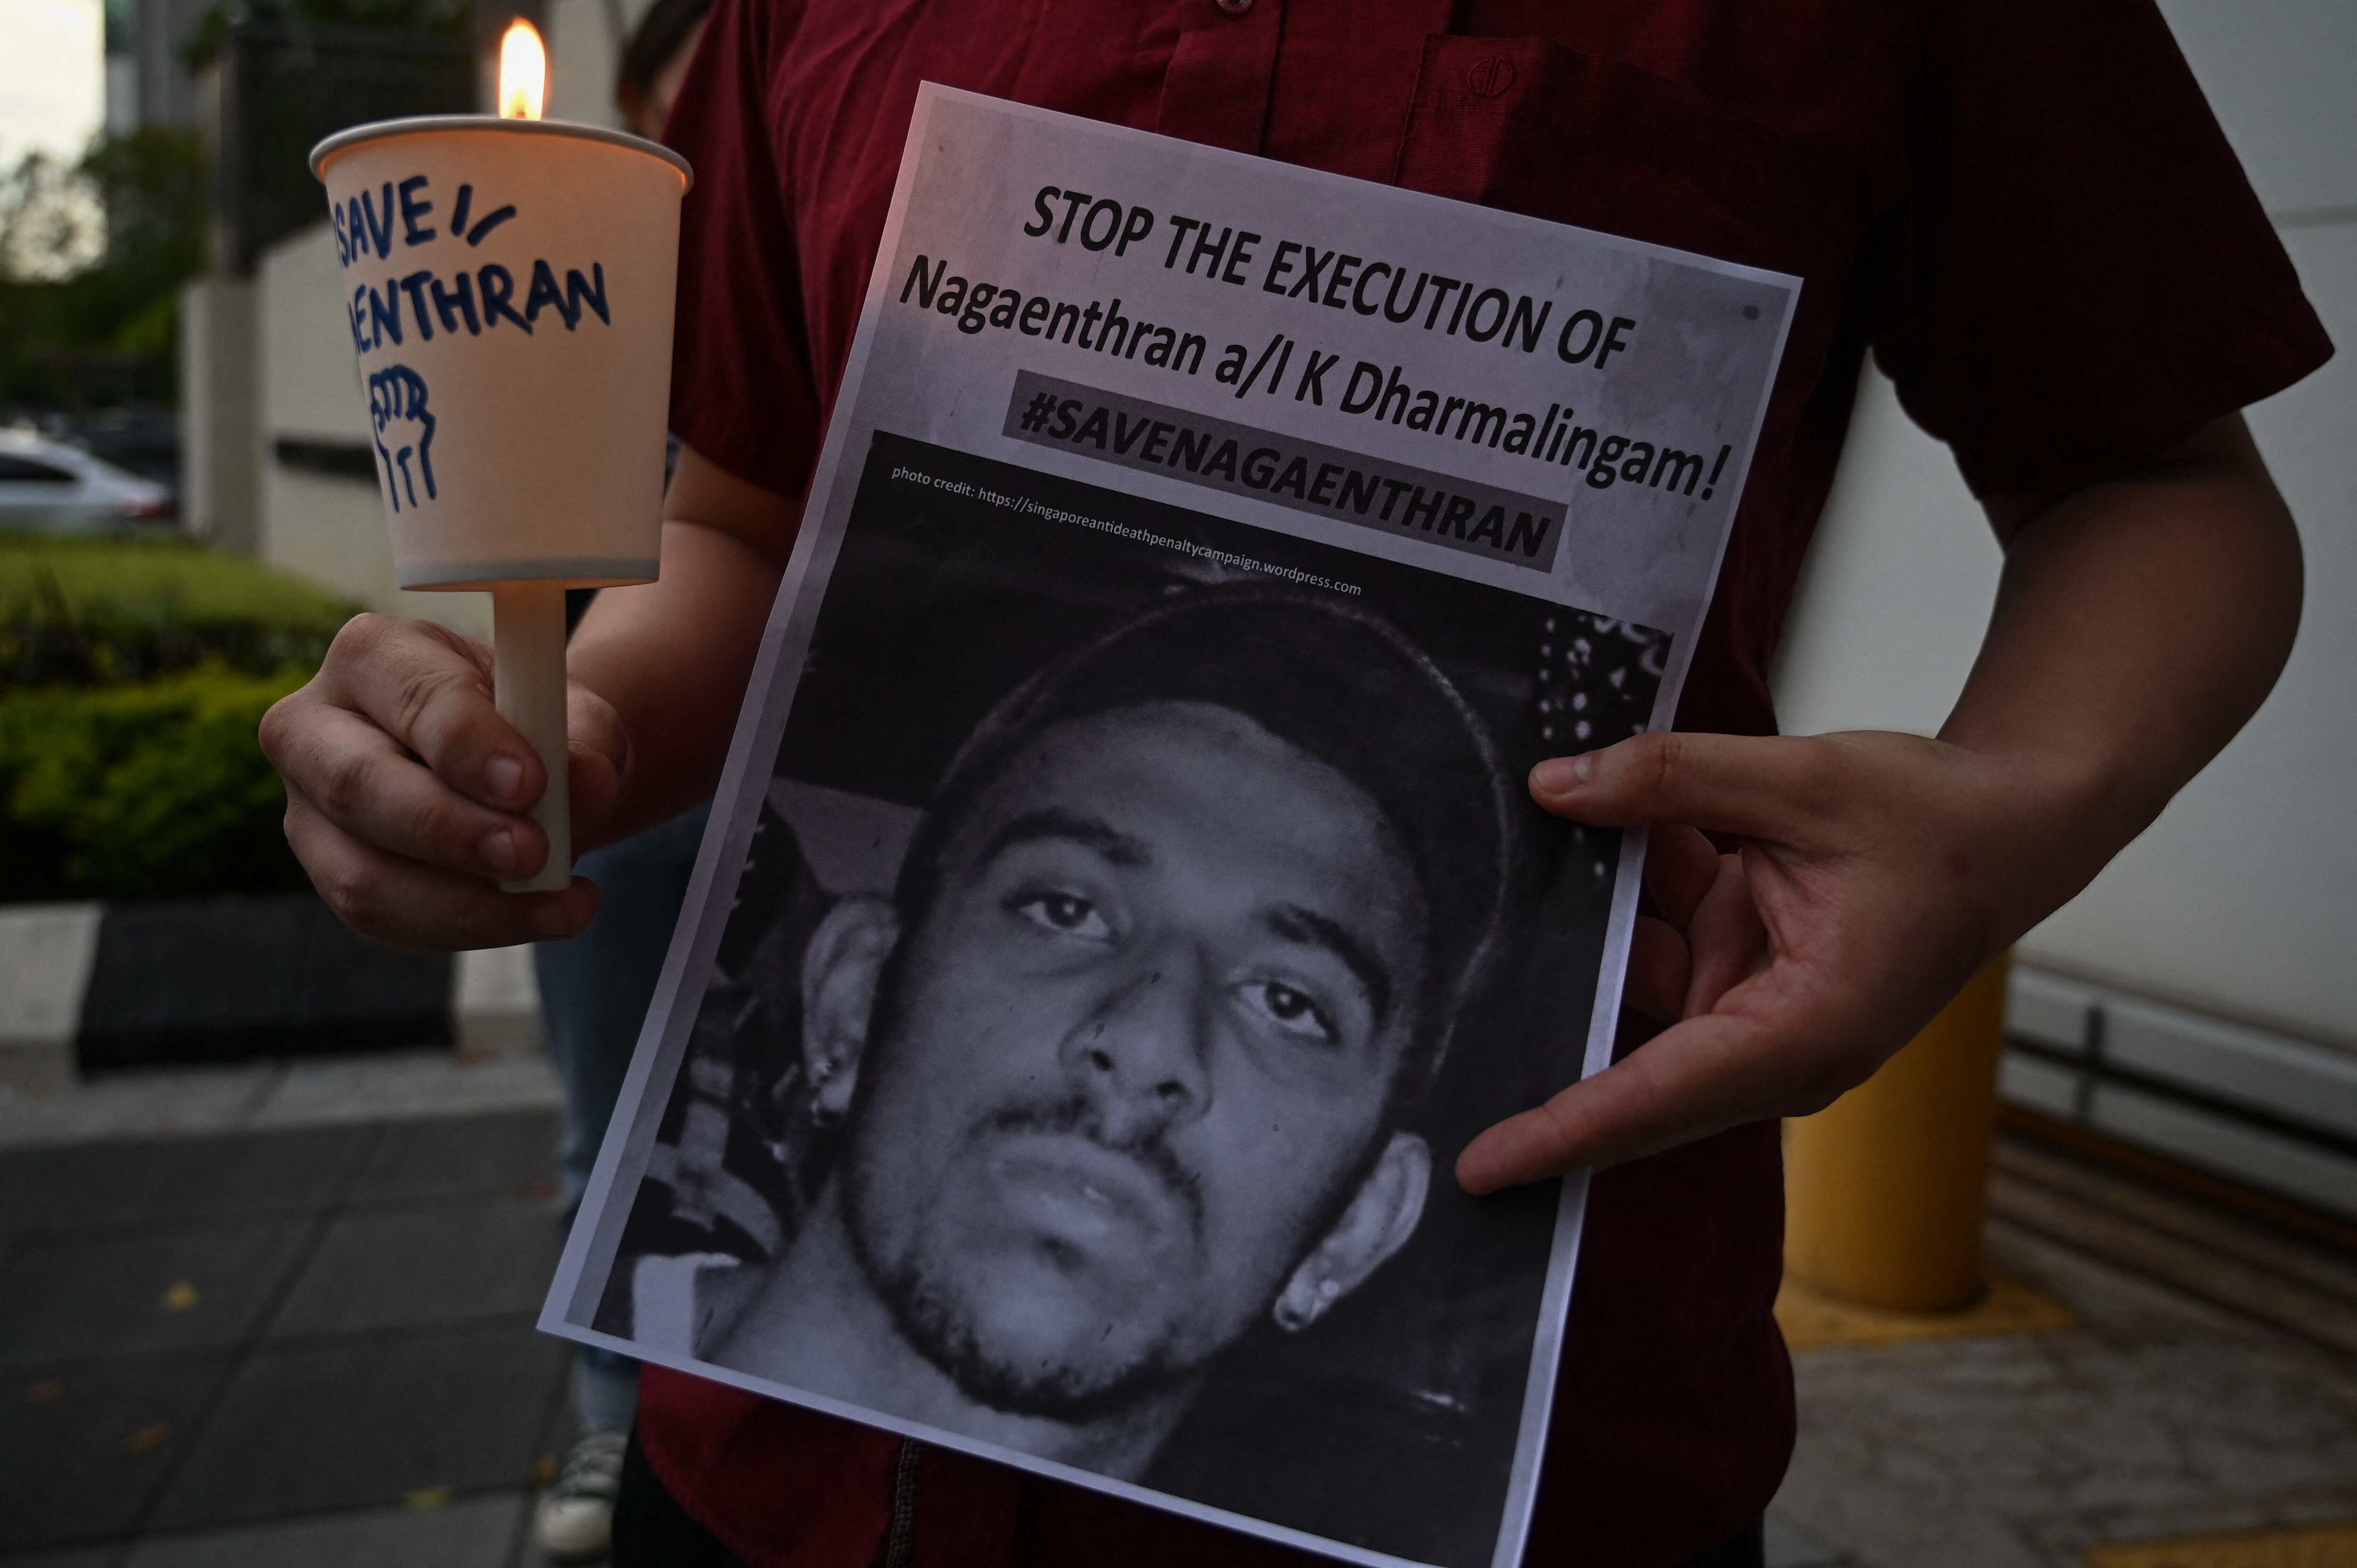 An activist holding a placard attends a candlelight vigil against the impending execution of Nagaenthran K. Dharmalingam, sentenced to death for trafficking heroin into Singapore, outside the Singaporean embassy in Kuala Lumpur on November 8, 2021. (AFP Photo)